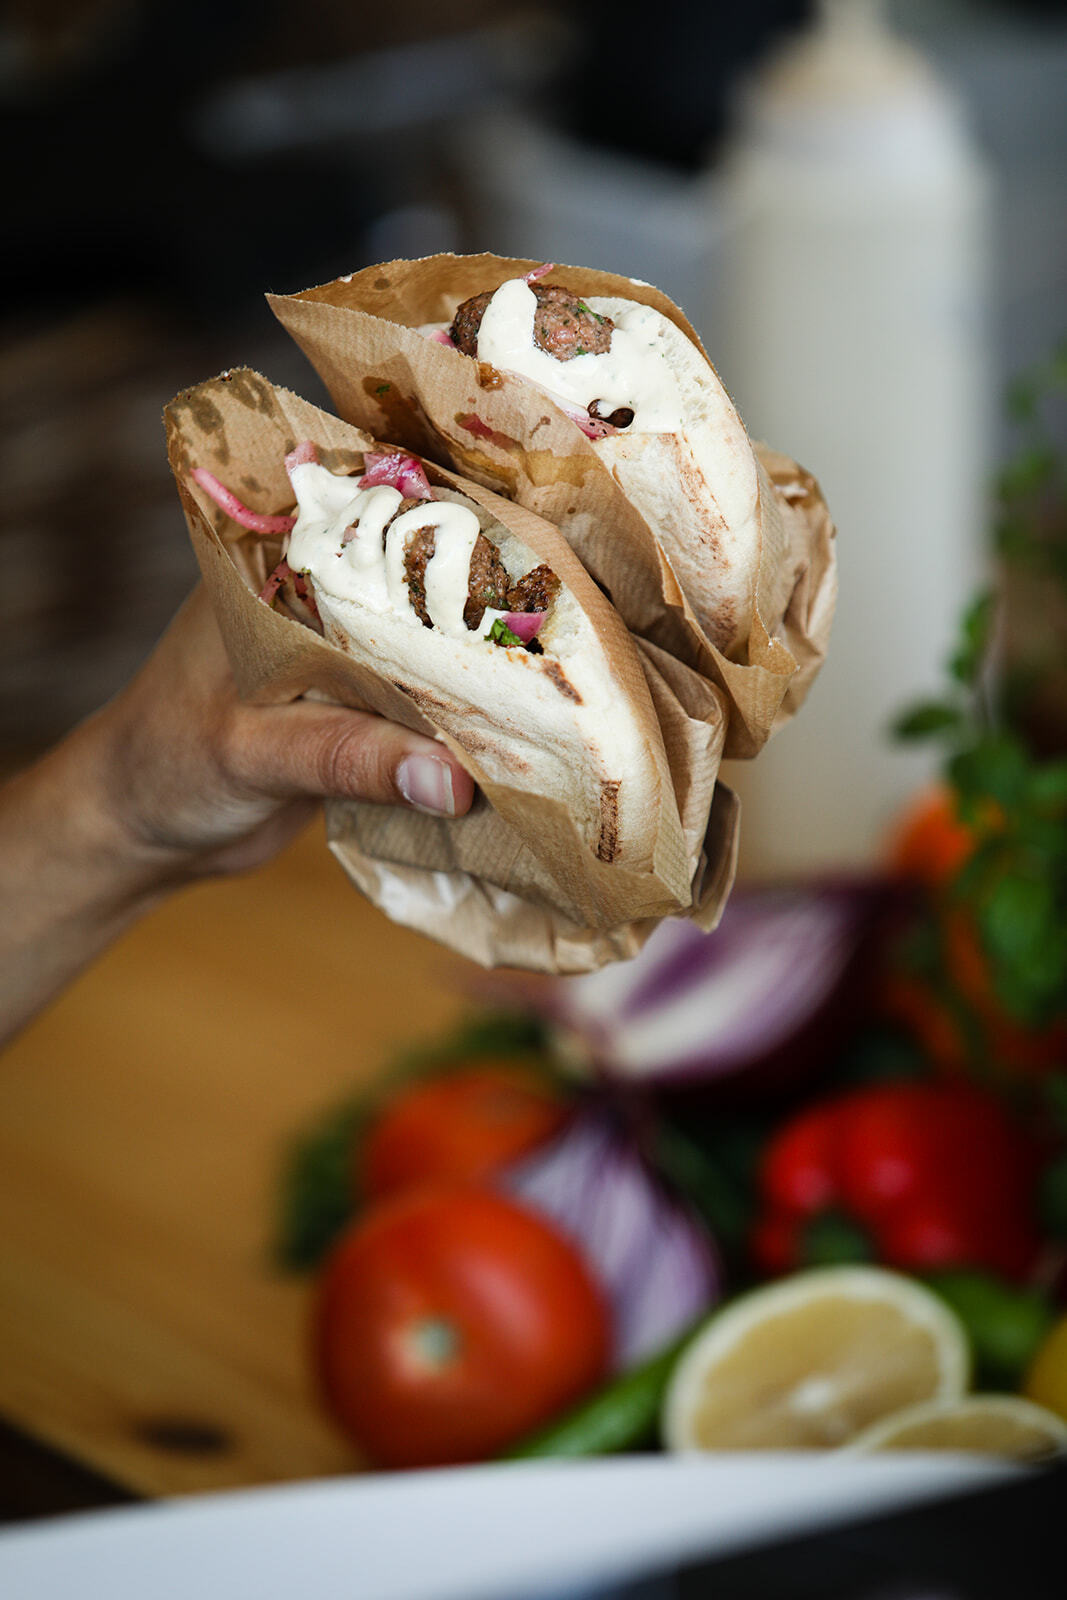 A pita made with Redefine Meat's plant-based lamb product, shown at the FoodTech IL 2022 conference.